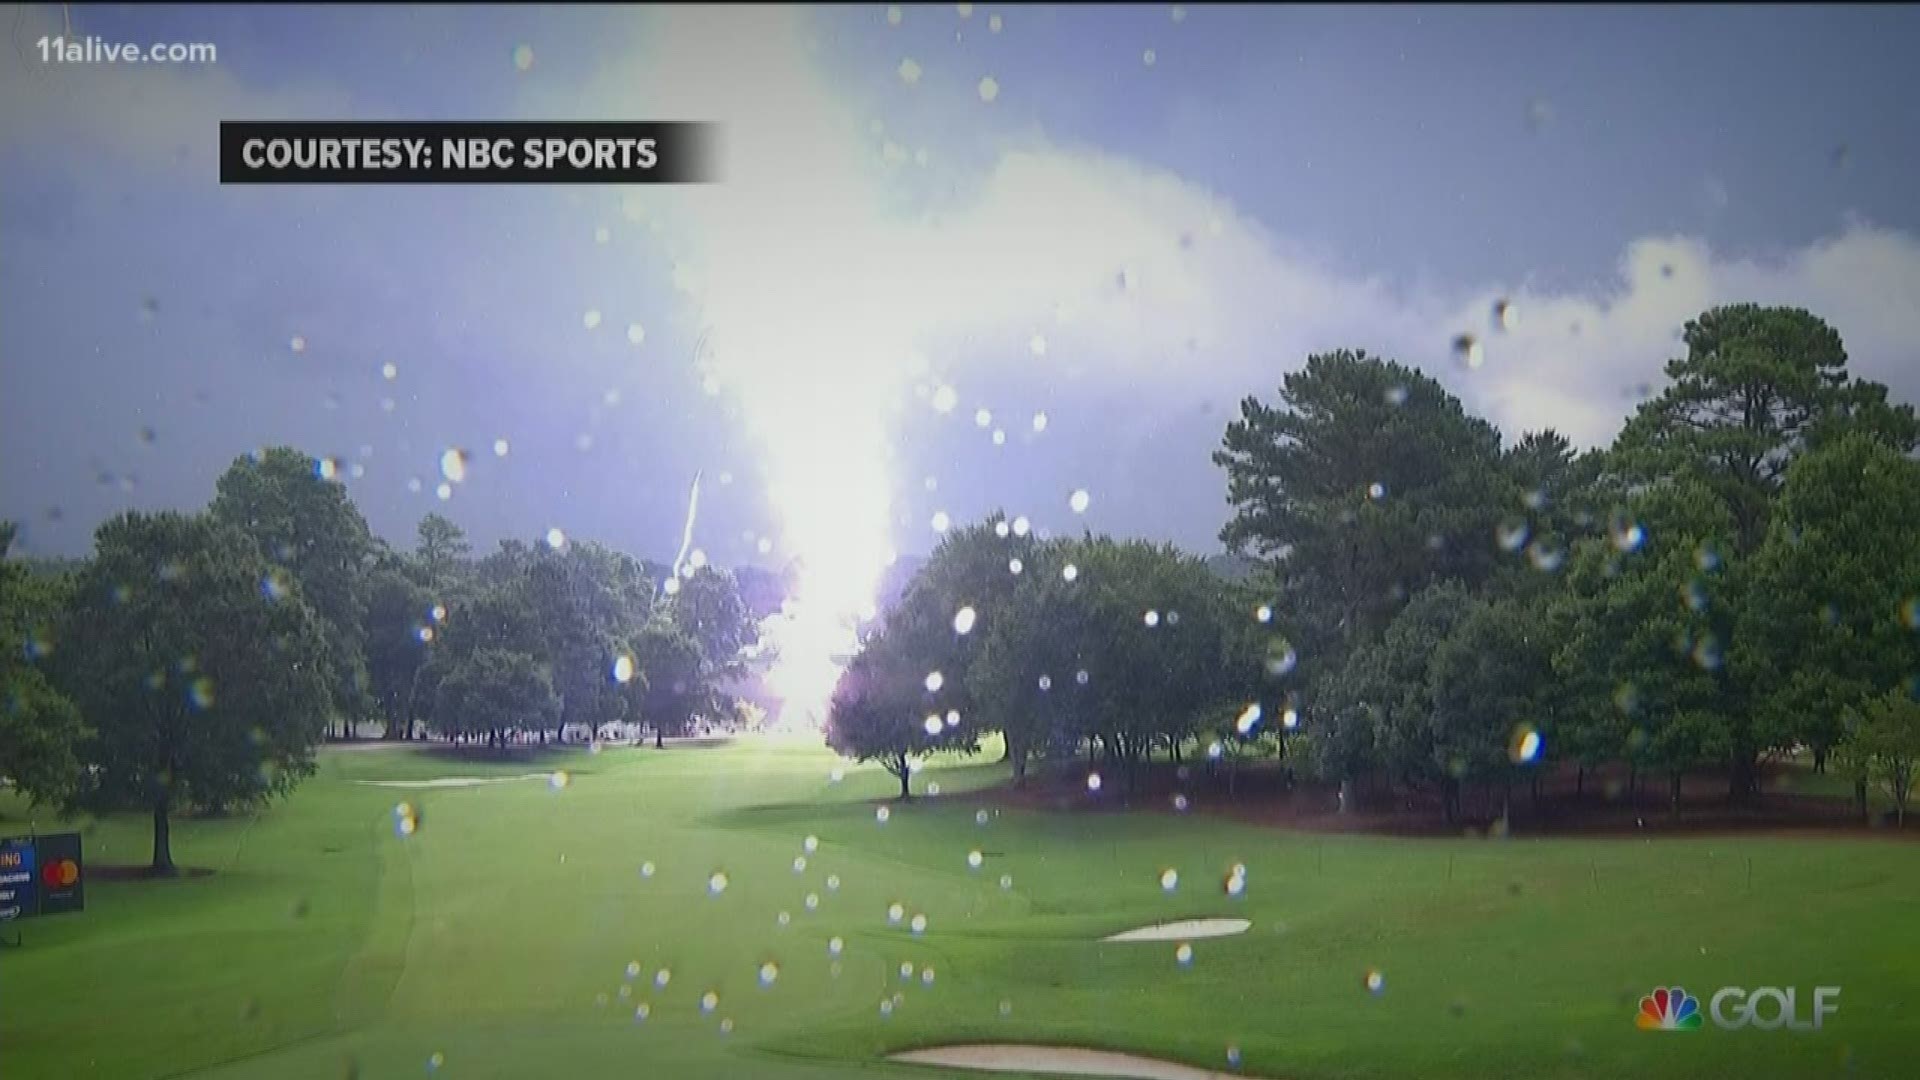 The TOUR Championship was interrupted this weekend by a lightning strike that hit a tree and injured several people.